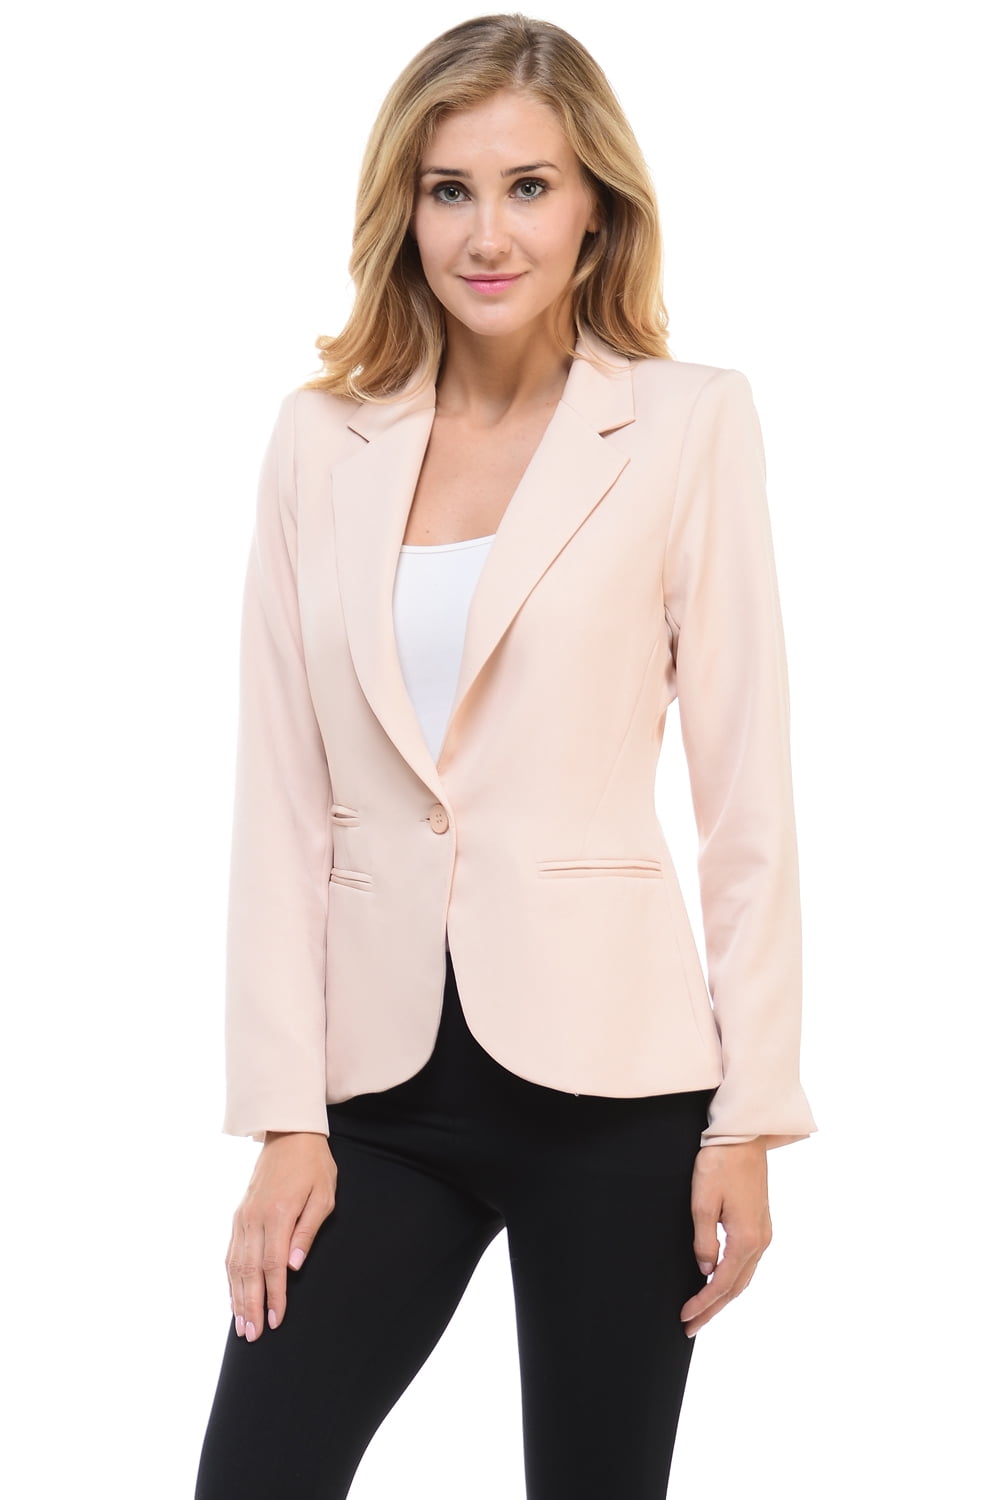 Auliné Collection Womens Candy Color Long Sleeve Lined Blazer - Walmart.com